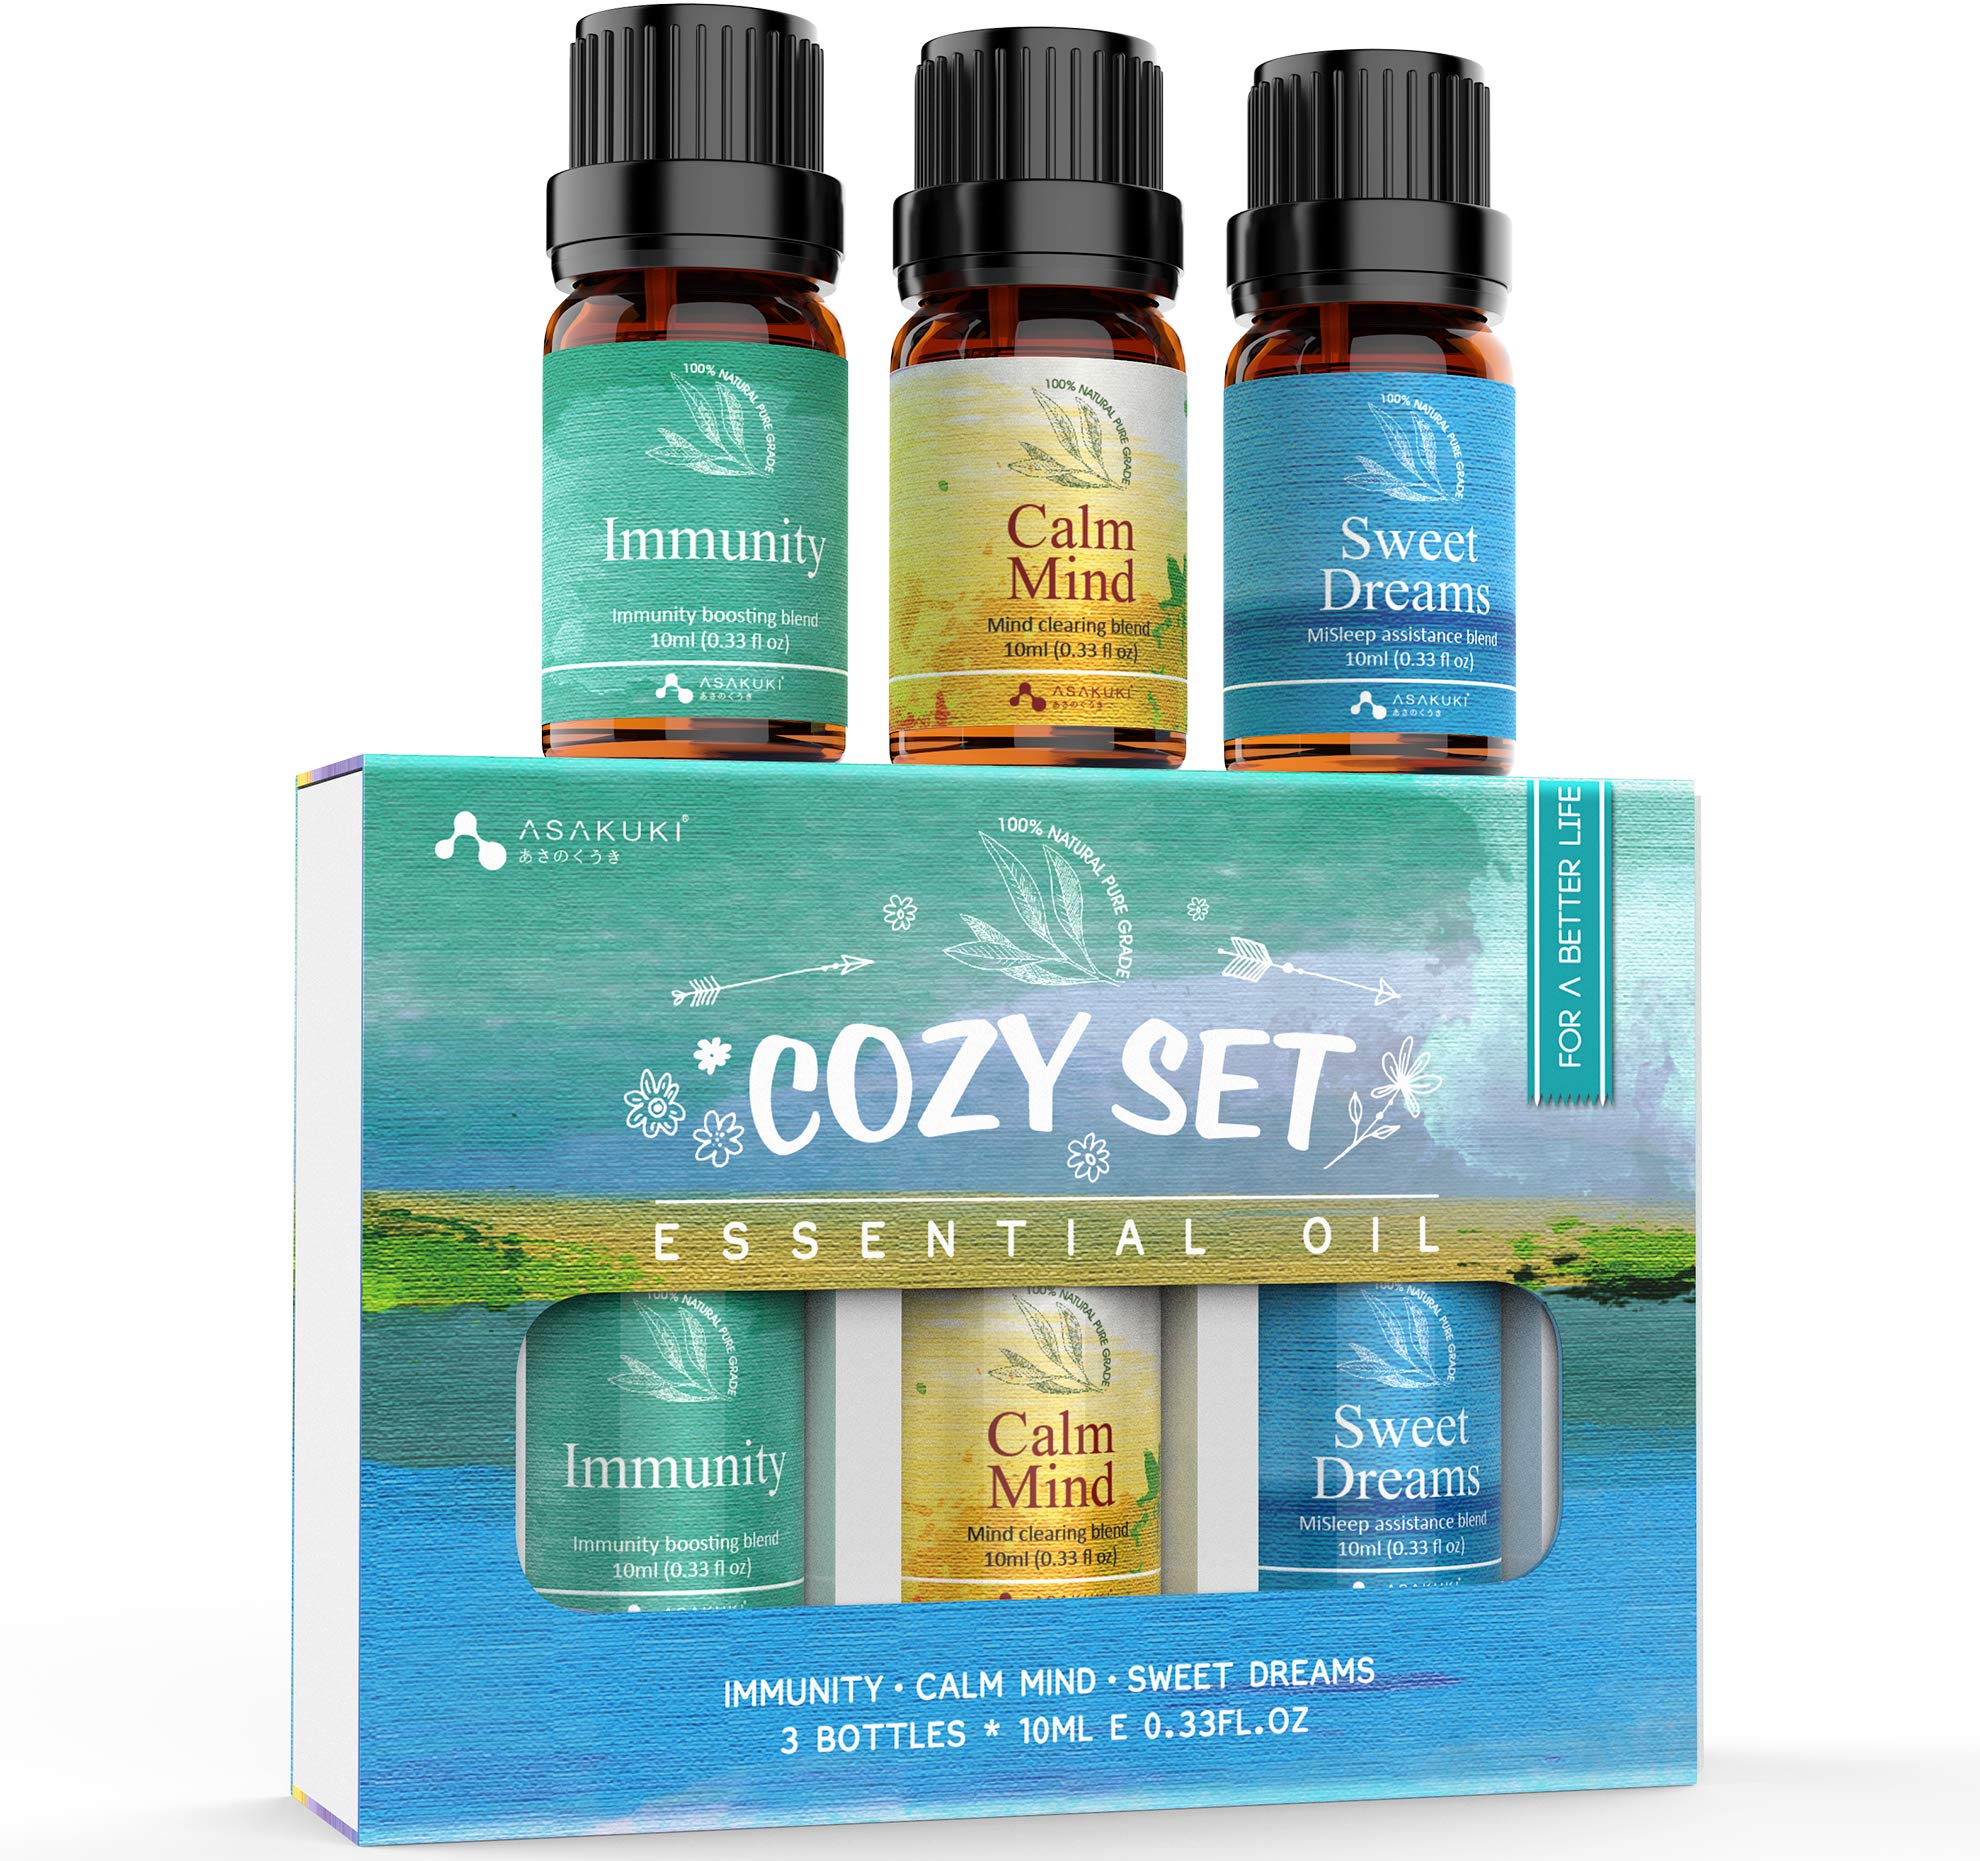 ASAKUKI Top3 Essential Oils Gift Set – 100% Pure Therapeutic Grade Aromatherapy Diffuser Blends Oils Help for Sleep Better, Wellness& Stress Relief , Immune Defence, Muscle Relief, Feel Good